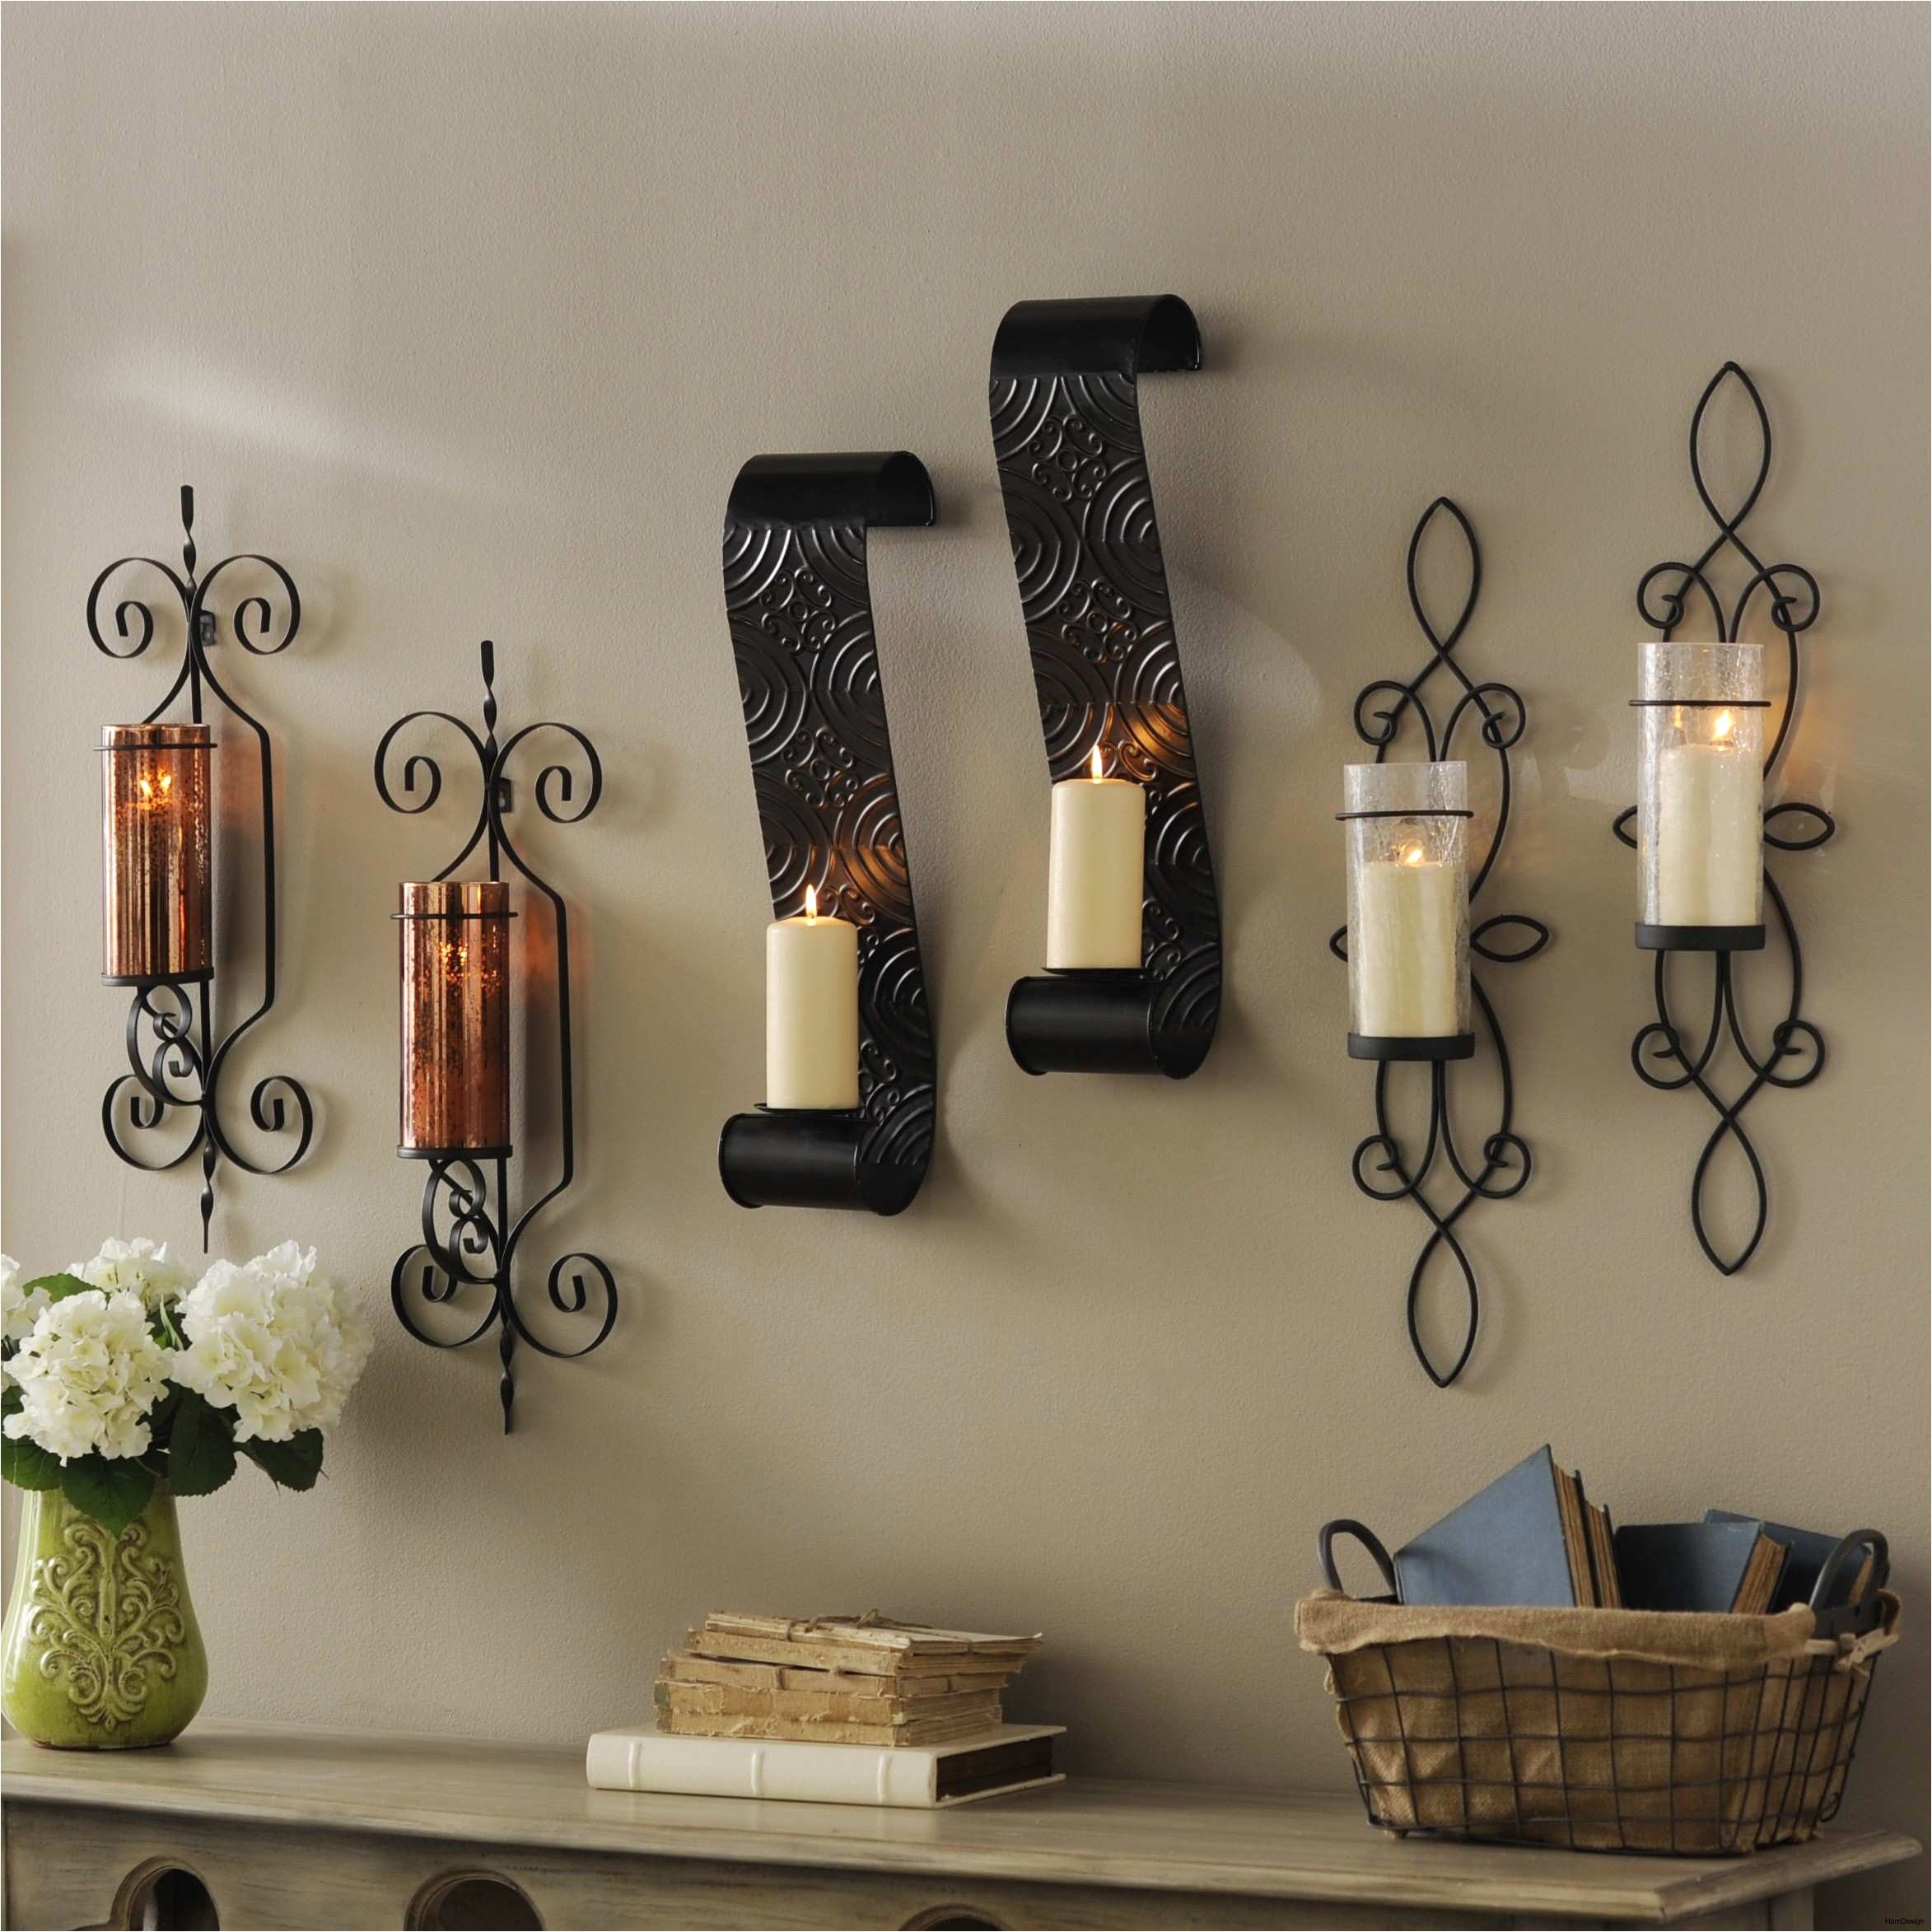 swag lamps that plug into wall lovely kitchen light cover best 1 kirkland wall decor home